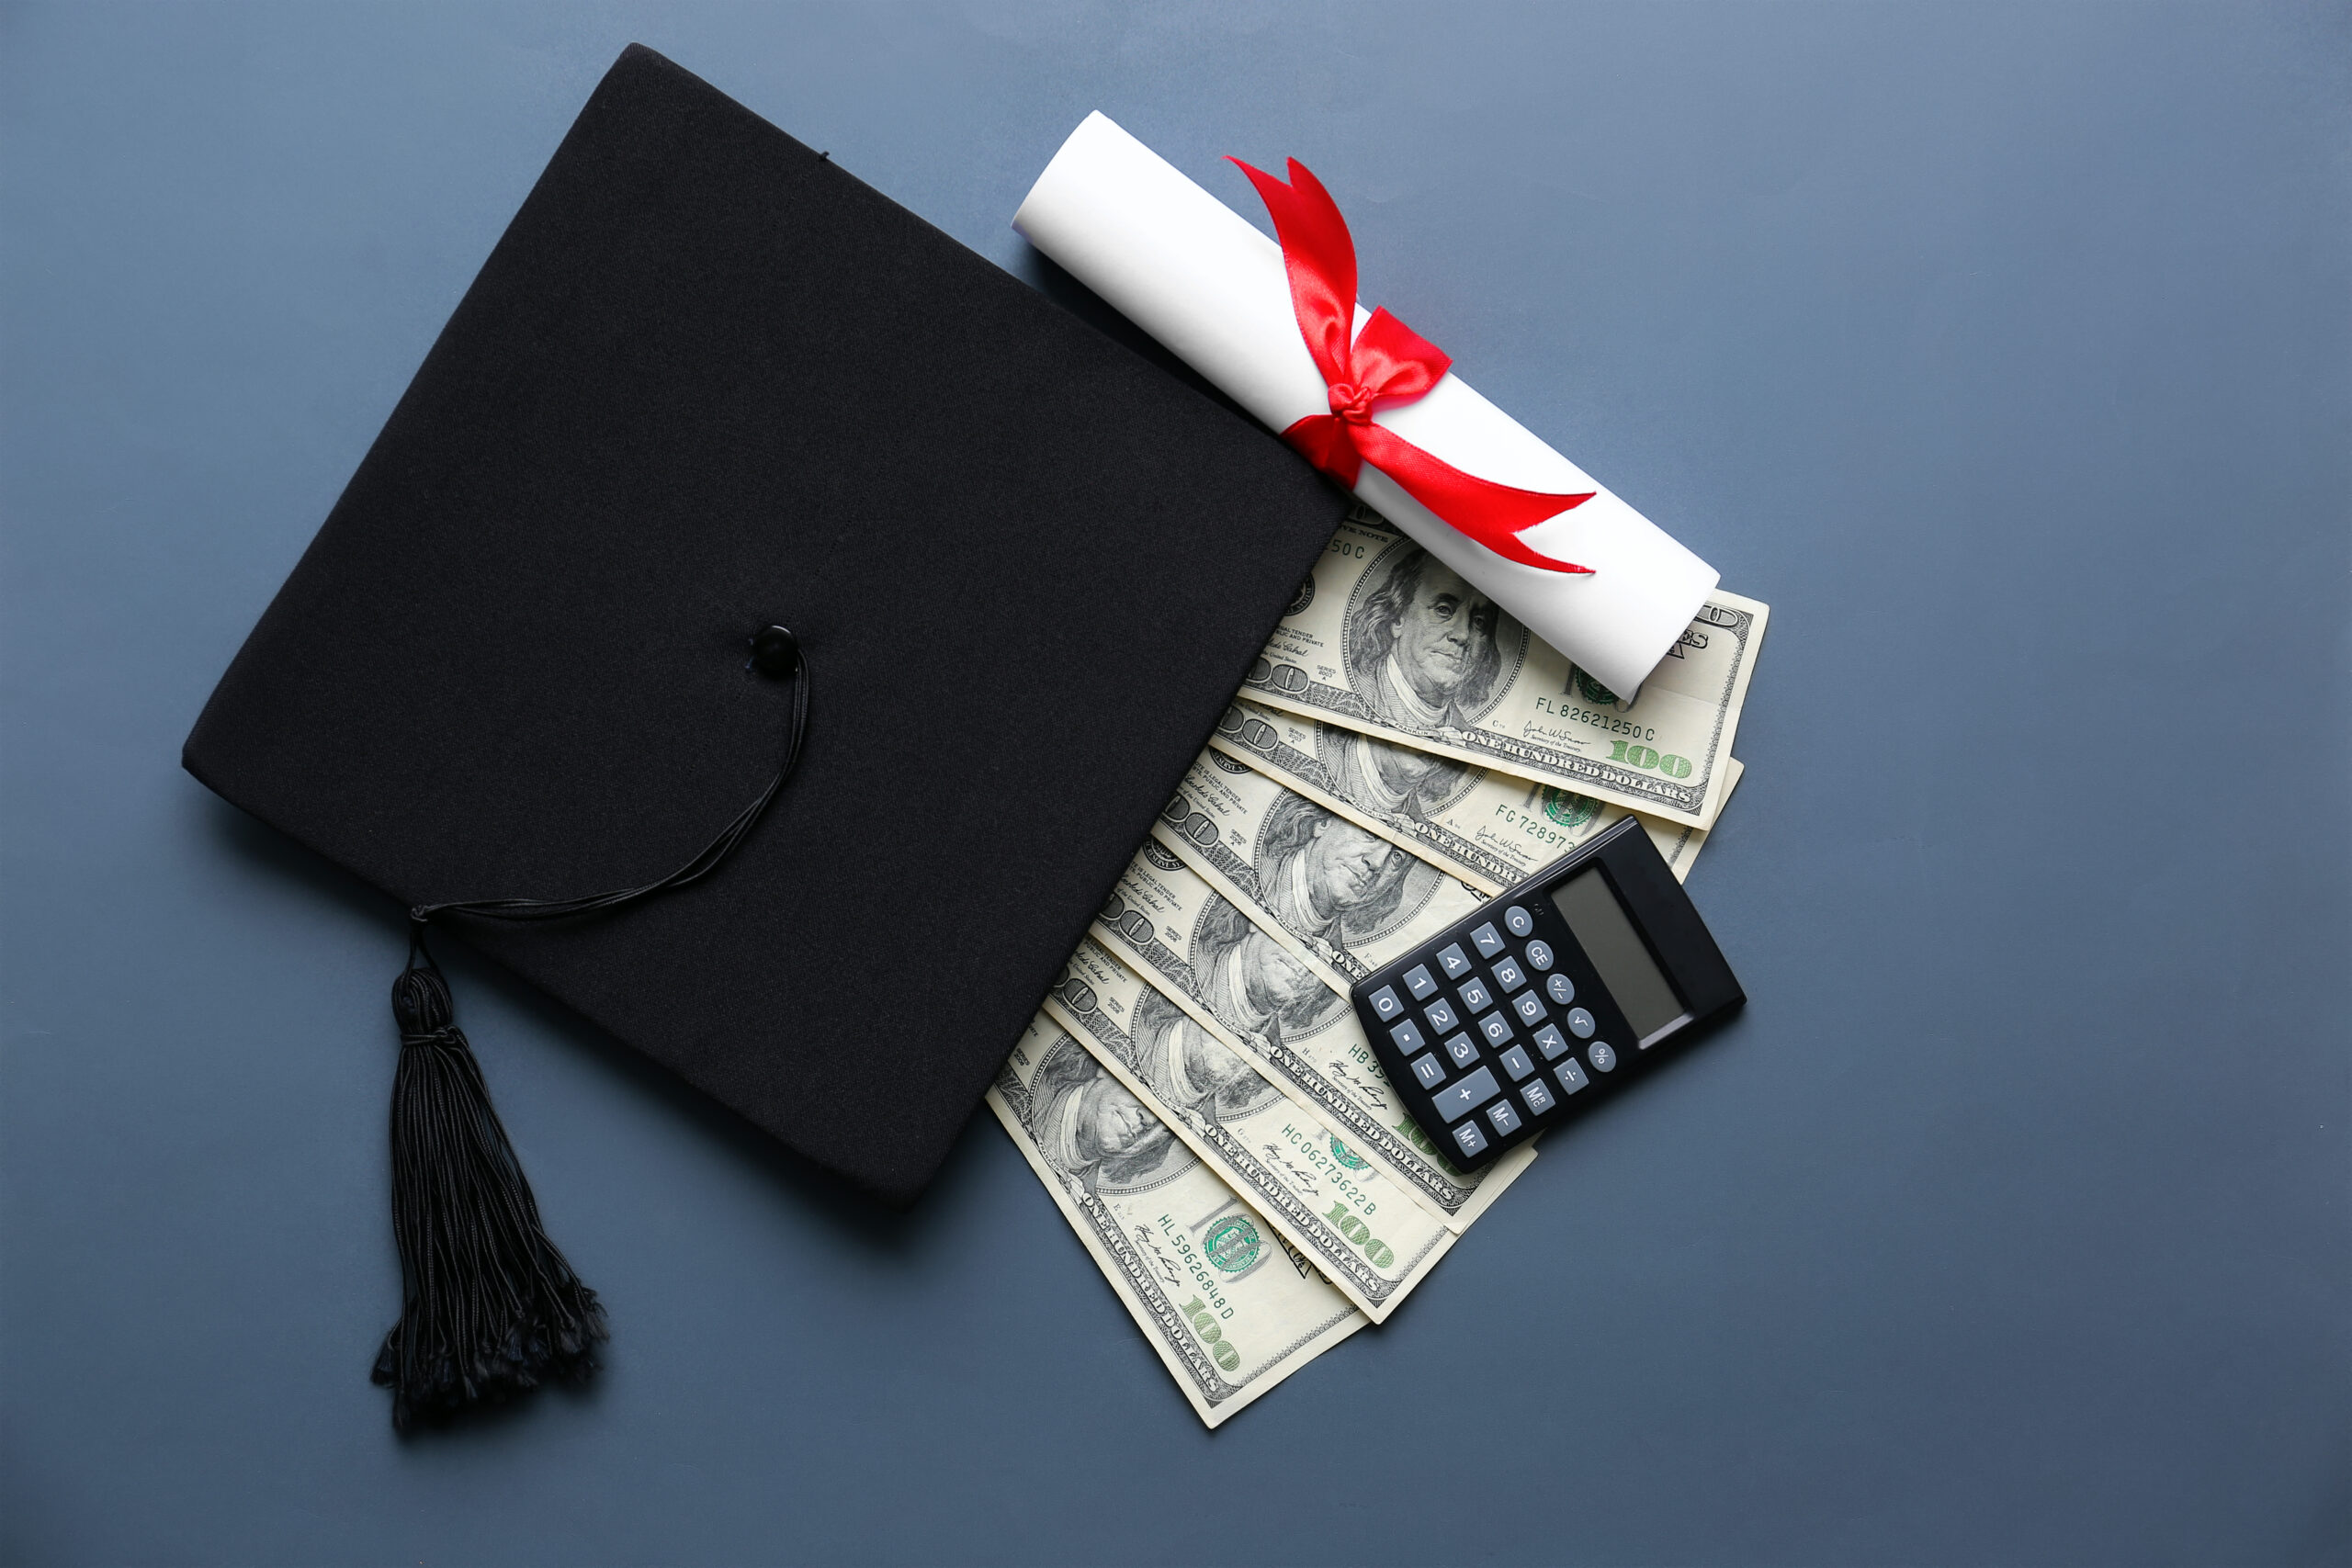 Mortar,Board,With,Diploma,Money,And,Calculator,On,Grey,Background.